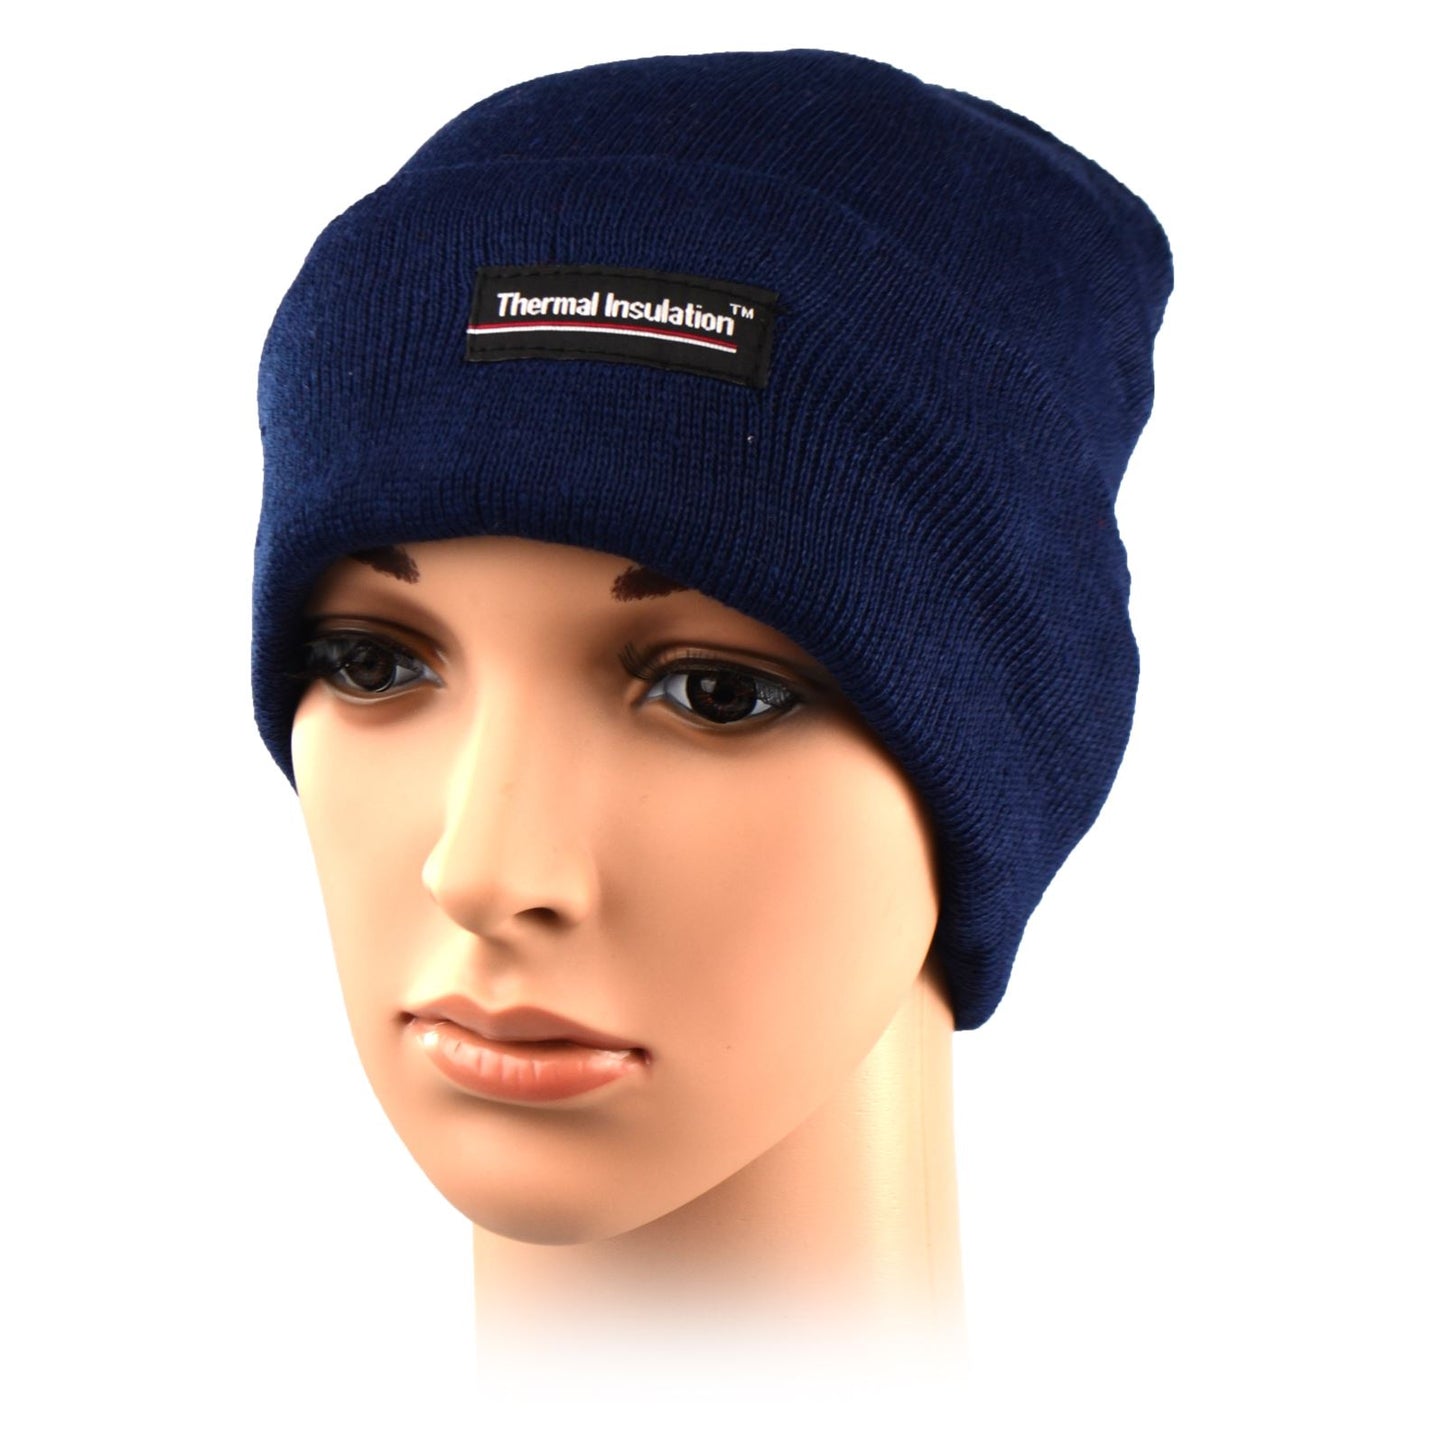 Men's Warm Knitted Thermal Beanie Hat for Winter Sports